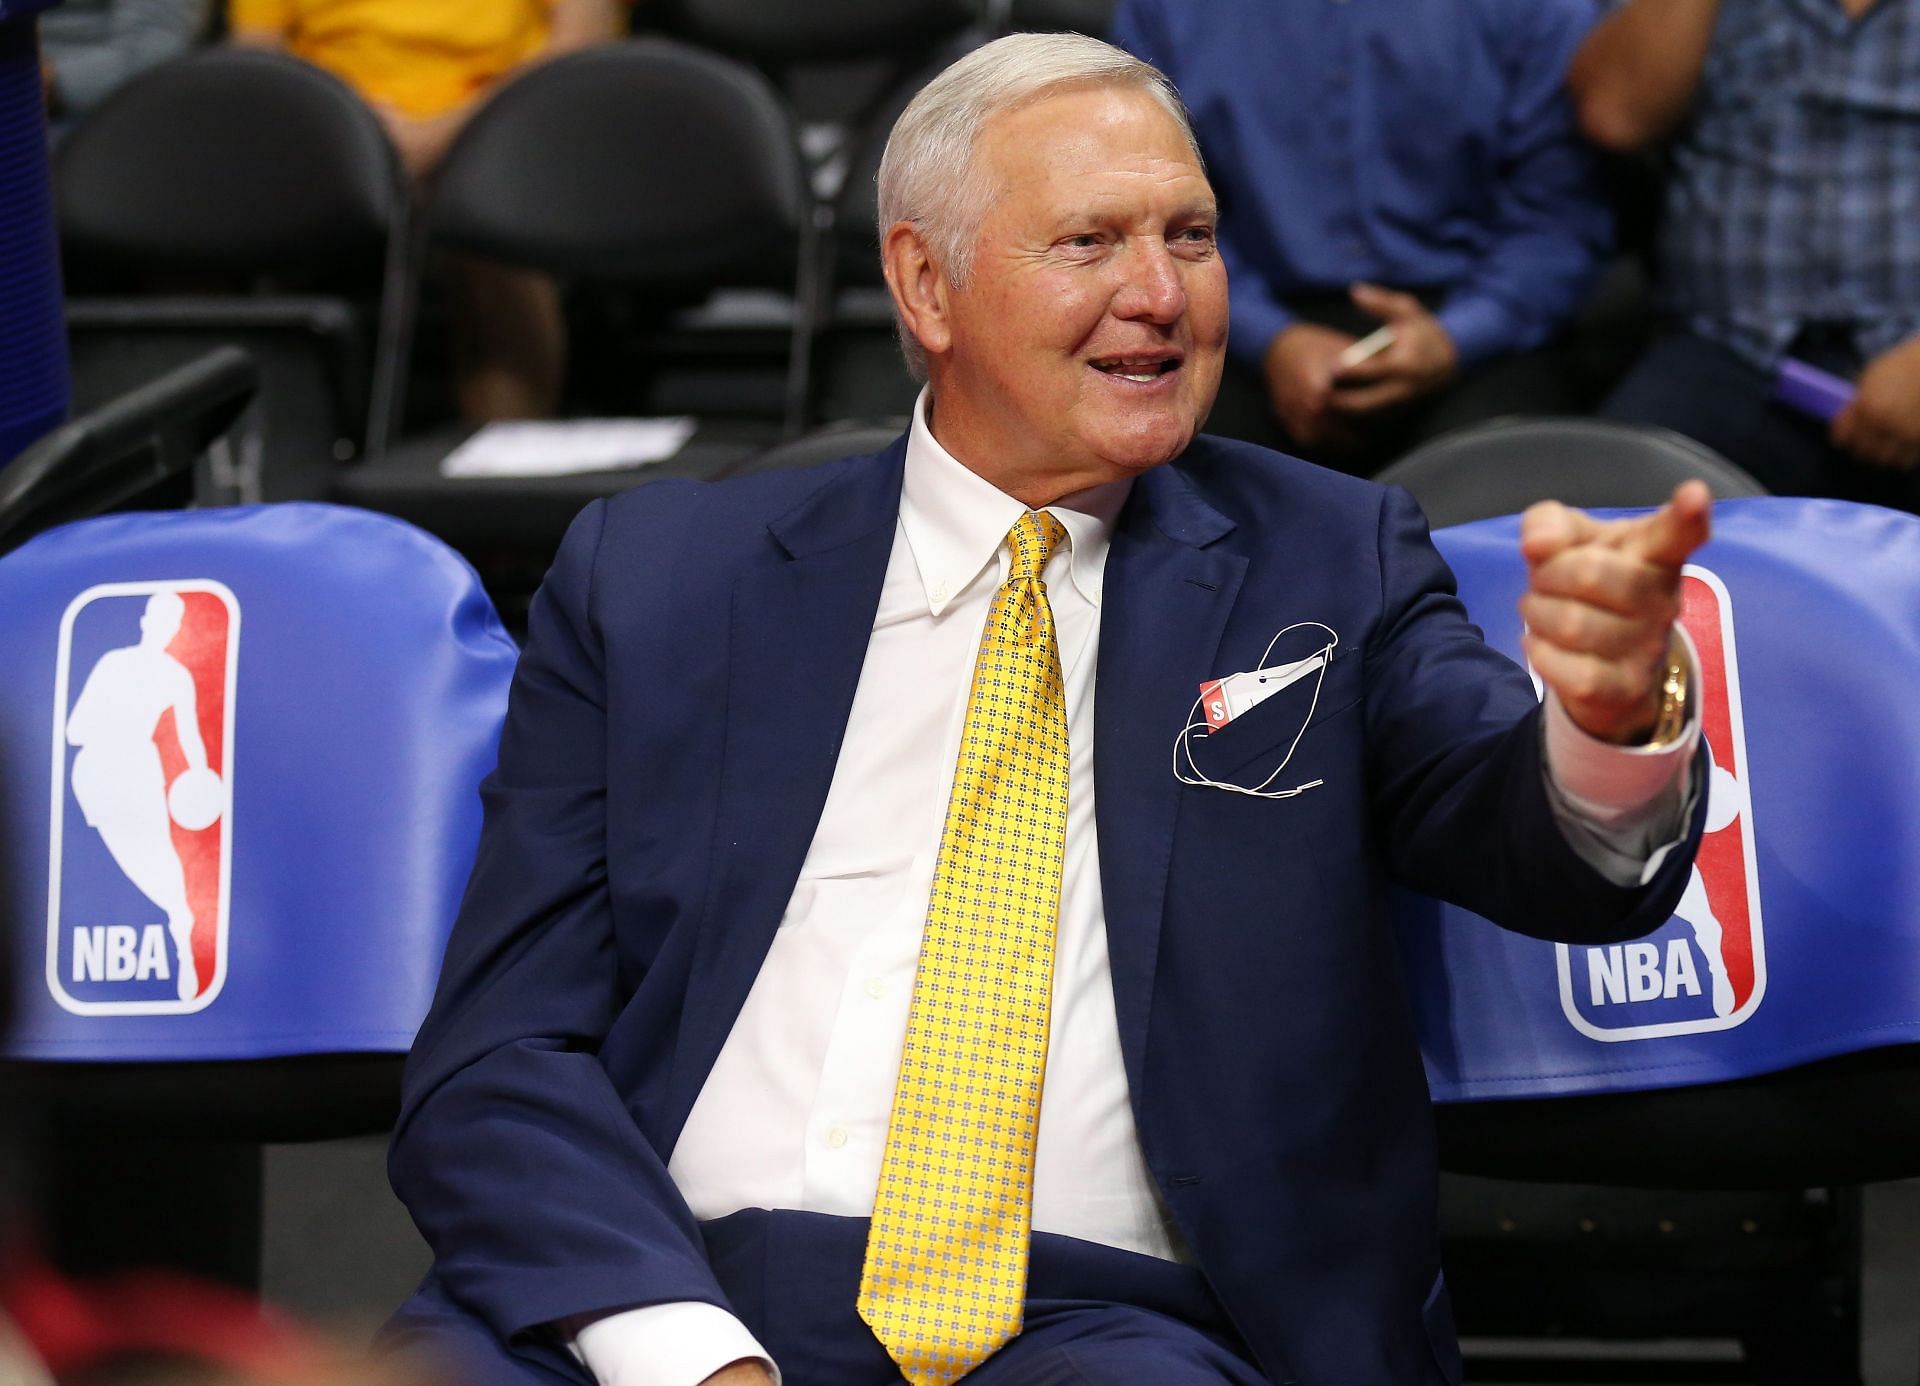 Jerry West is an NBA champion, with a finals MVP and 14 All-Star selections.